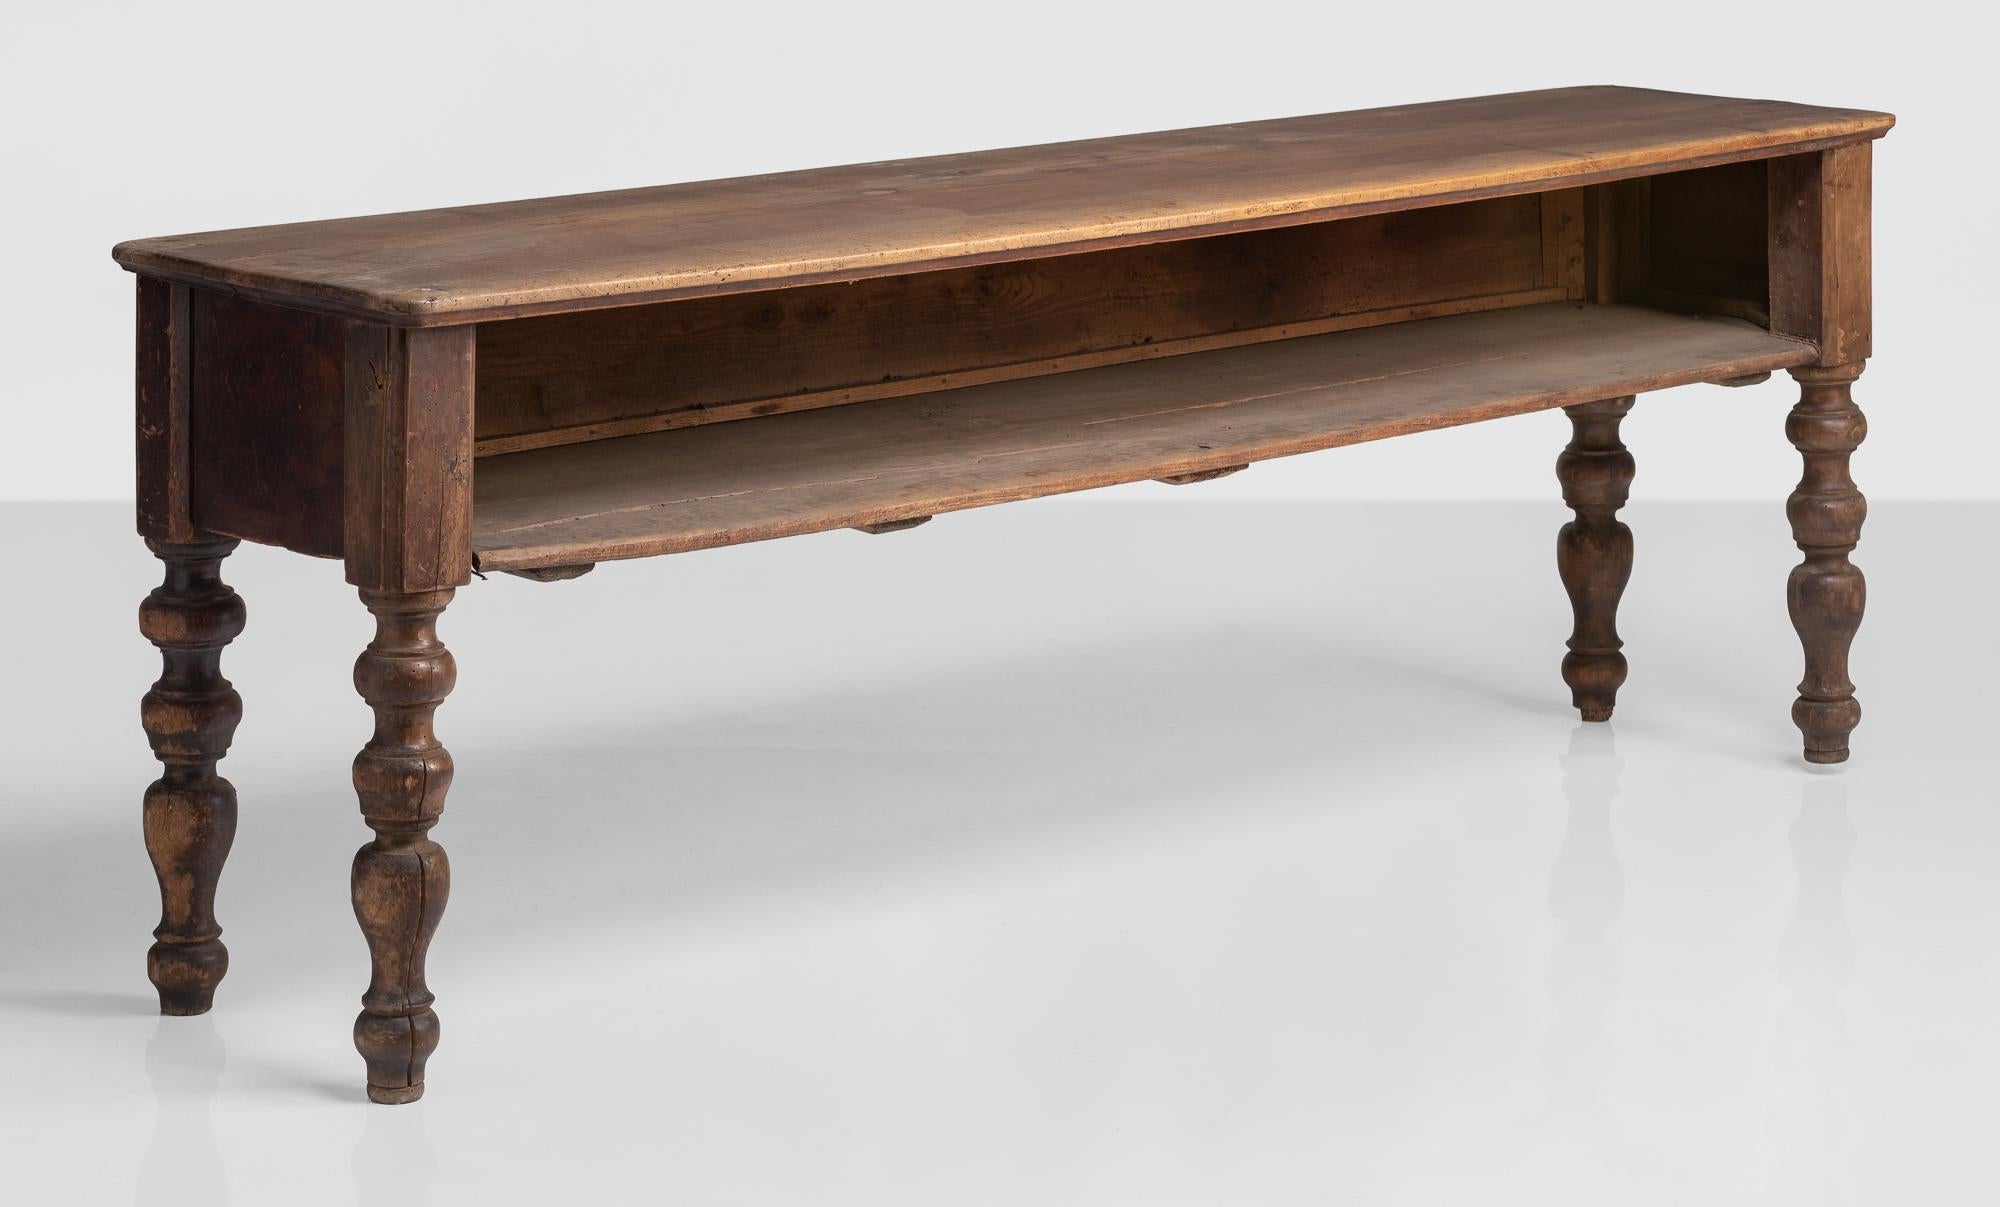 Walnut convent console, Italy, circa 1790

Simple form with open front and generous storage on turned legs.